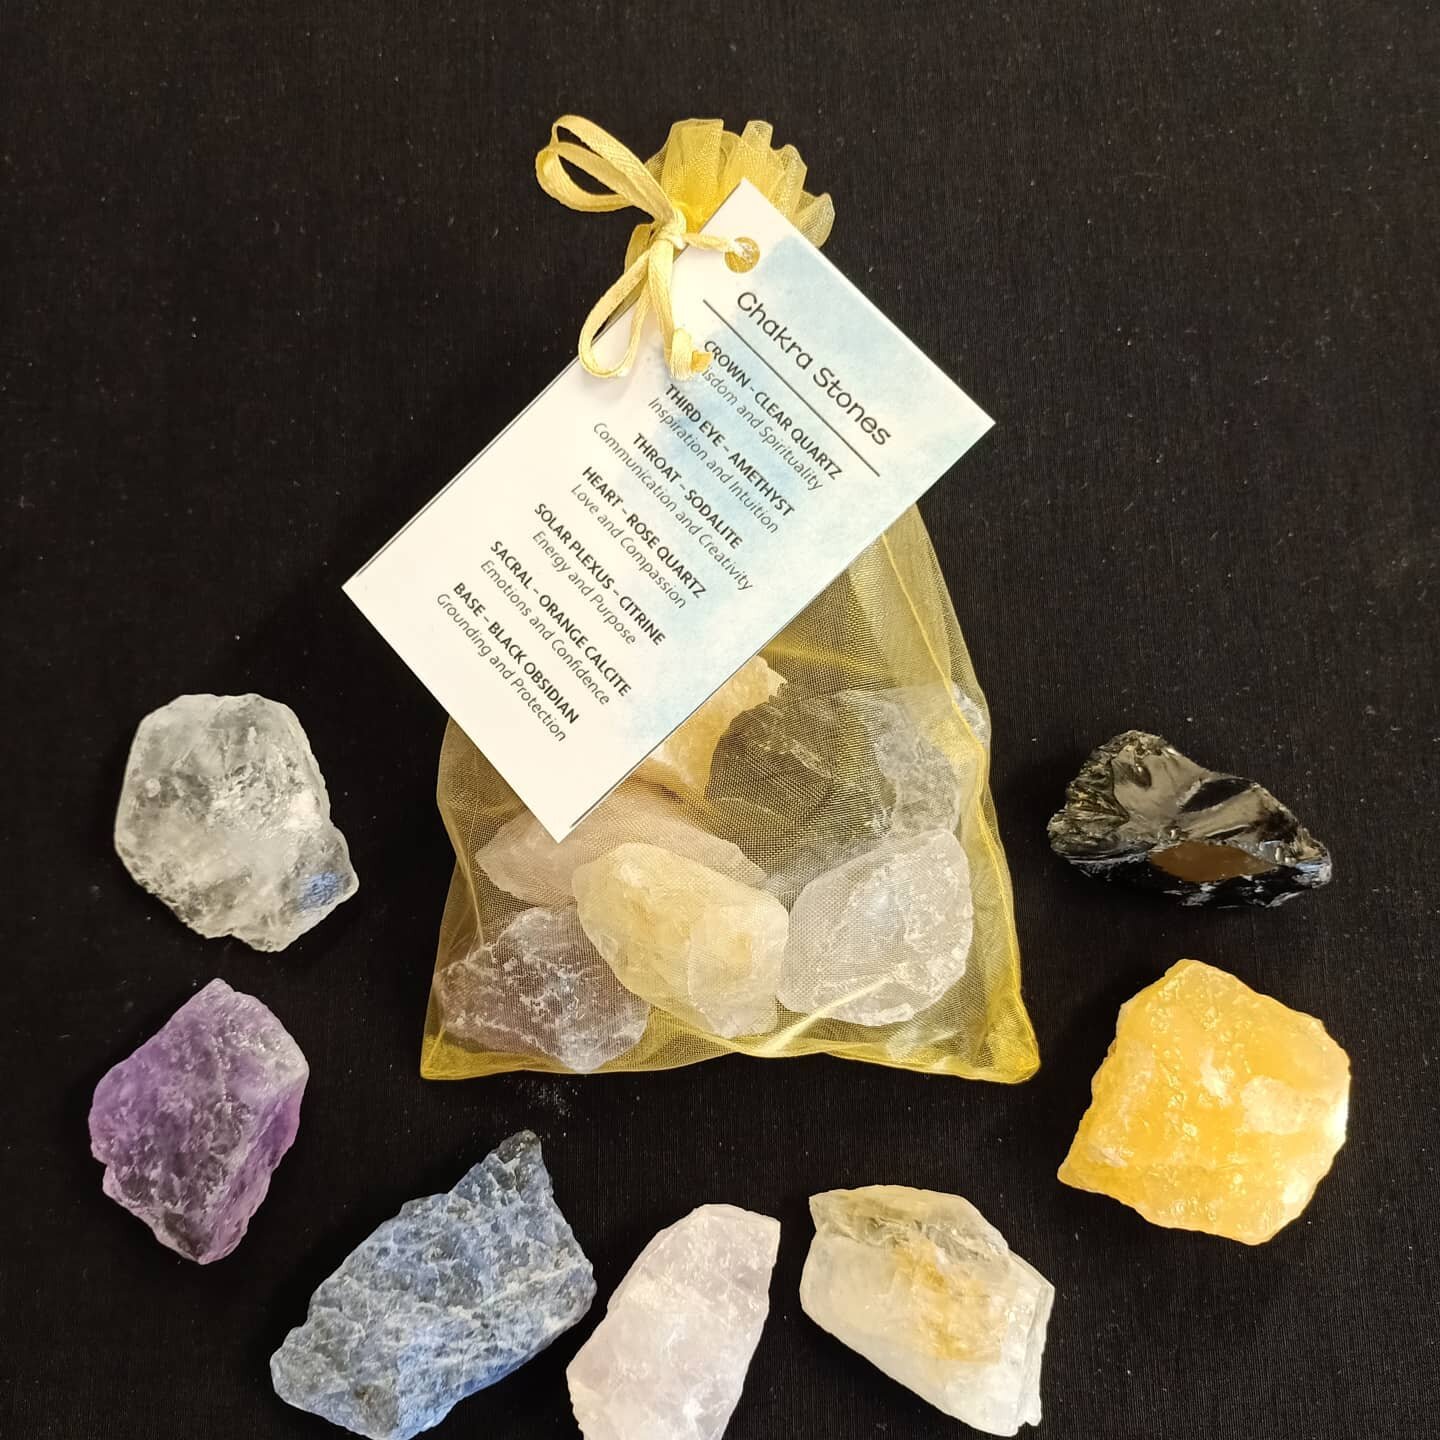 Lge raw crystal
Chakra sets 
$28 

www.soapshackemporium.com

Or in-store at 
383 Main South Rd Hornby

#crystals #gifts #staywell #spiritual #love #supportlocalbusiness #bestoftheday #blessings